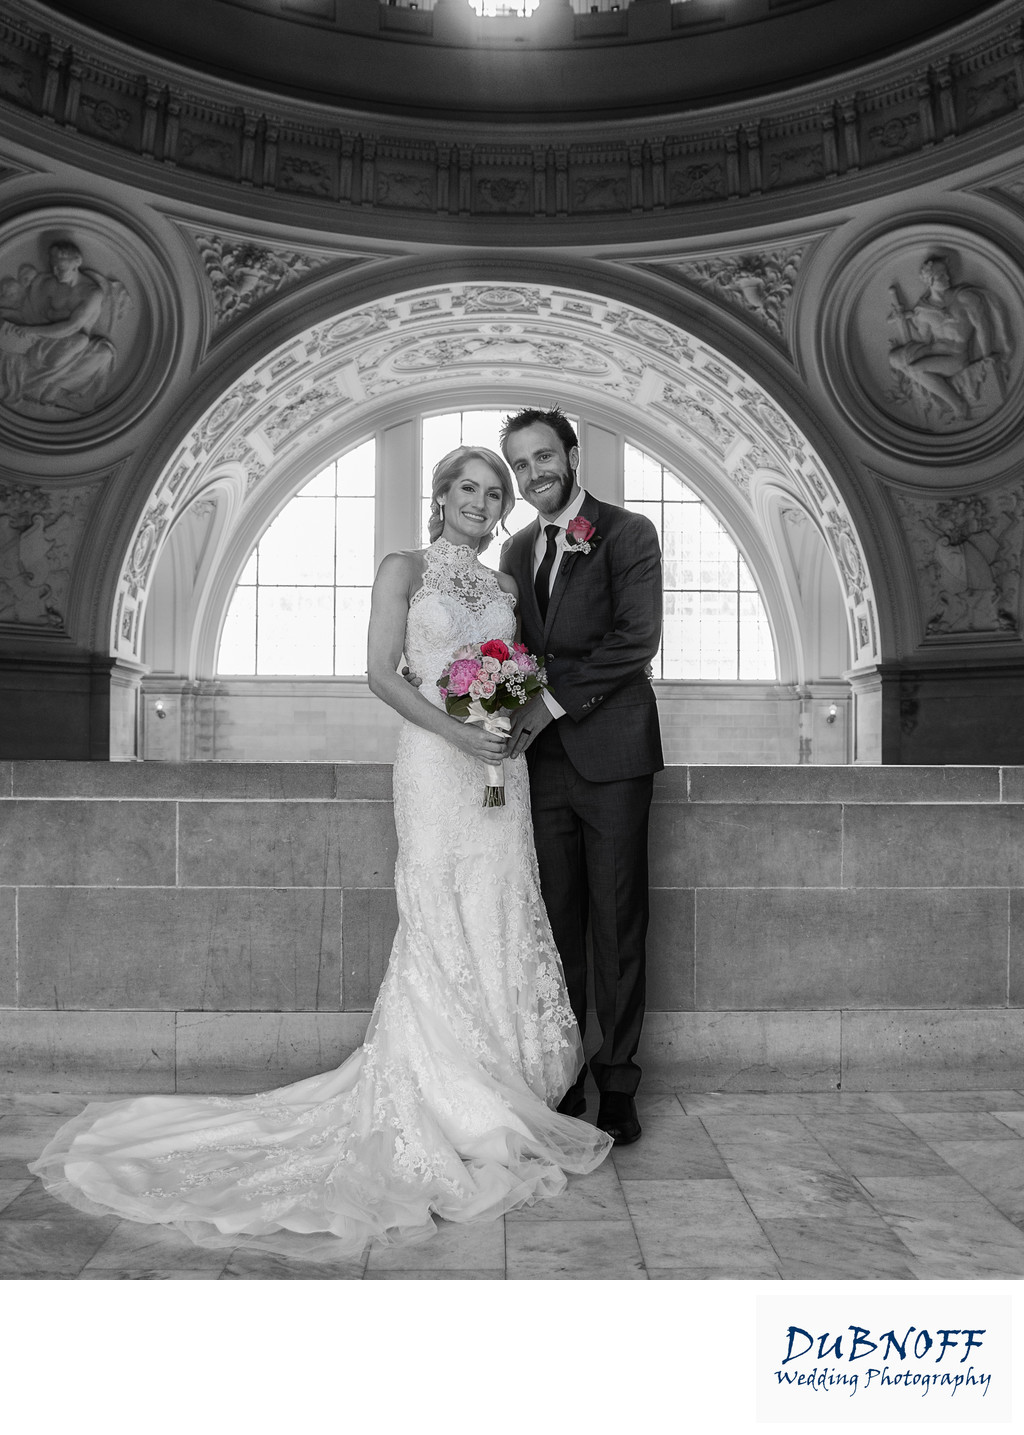 Black and White Wedding Photography with Areas of Color